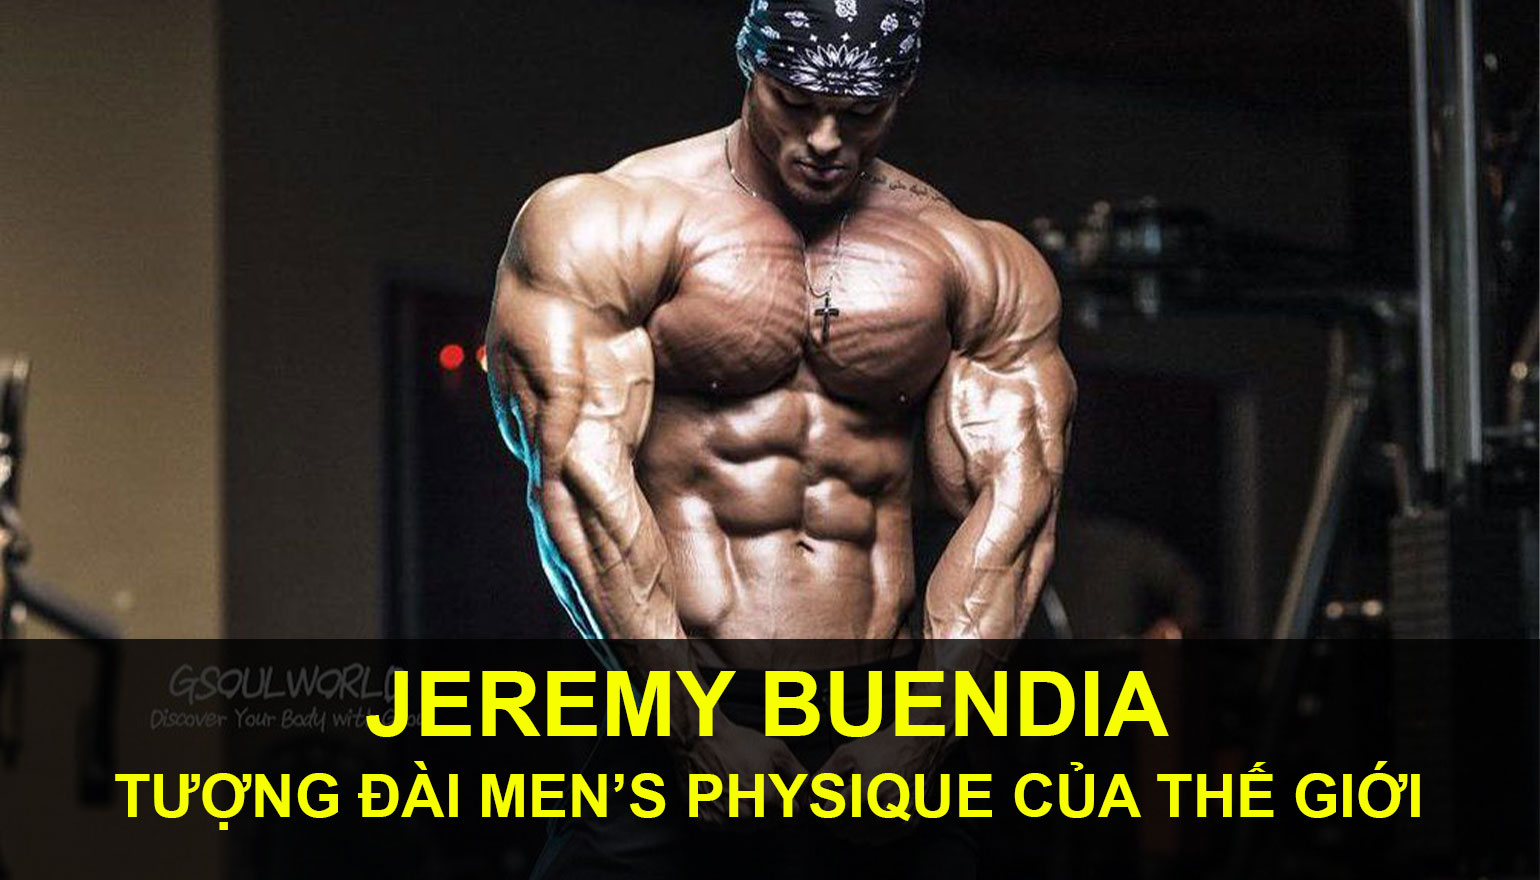 4x Mr Olympia Jeremy Buendia All set for #mrolympia 2018 #fightforfive | By  Fitness GroupFacebook